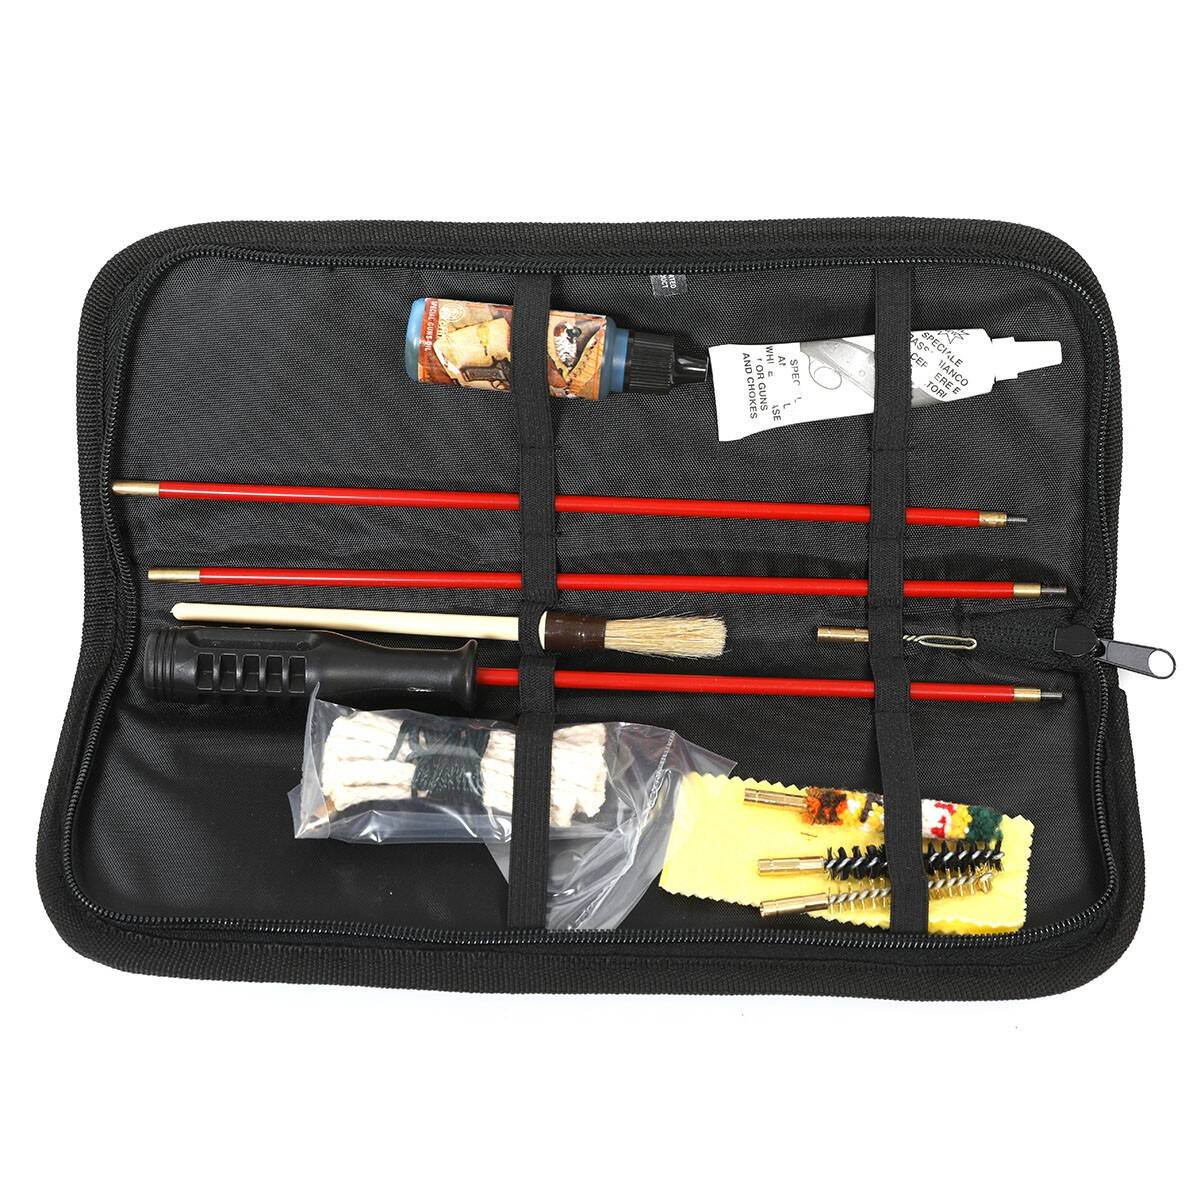 Modular Cleaning Rod Kit in a Bag